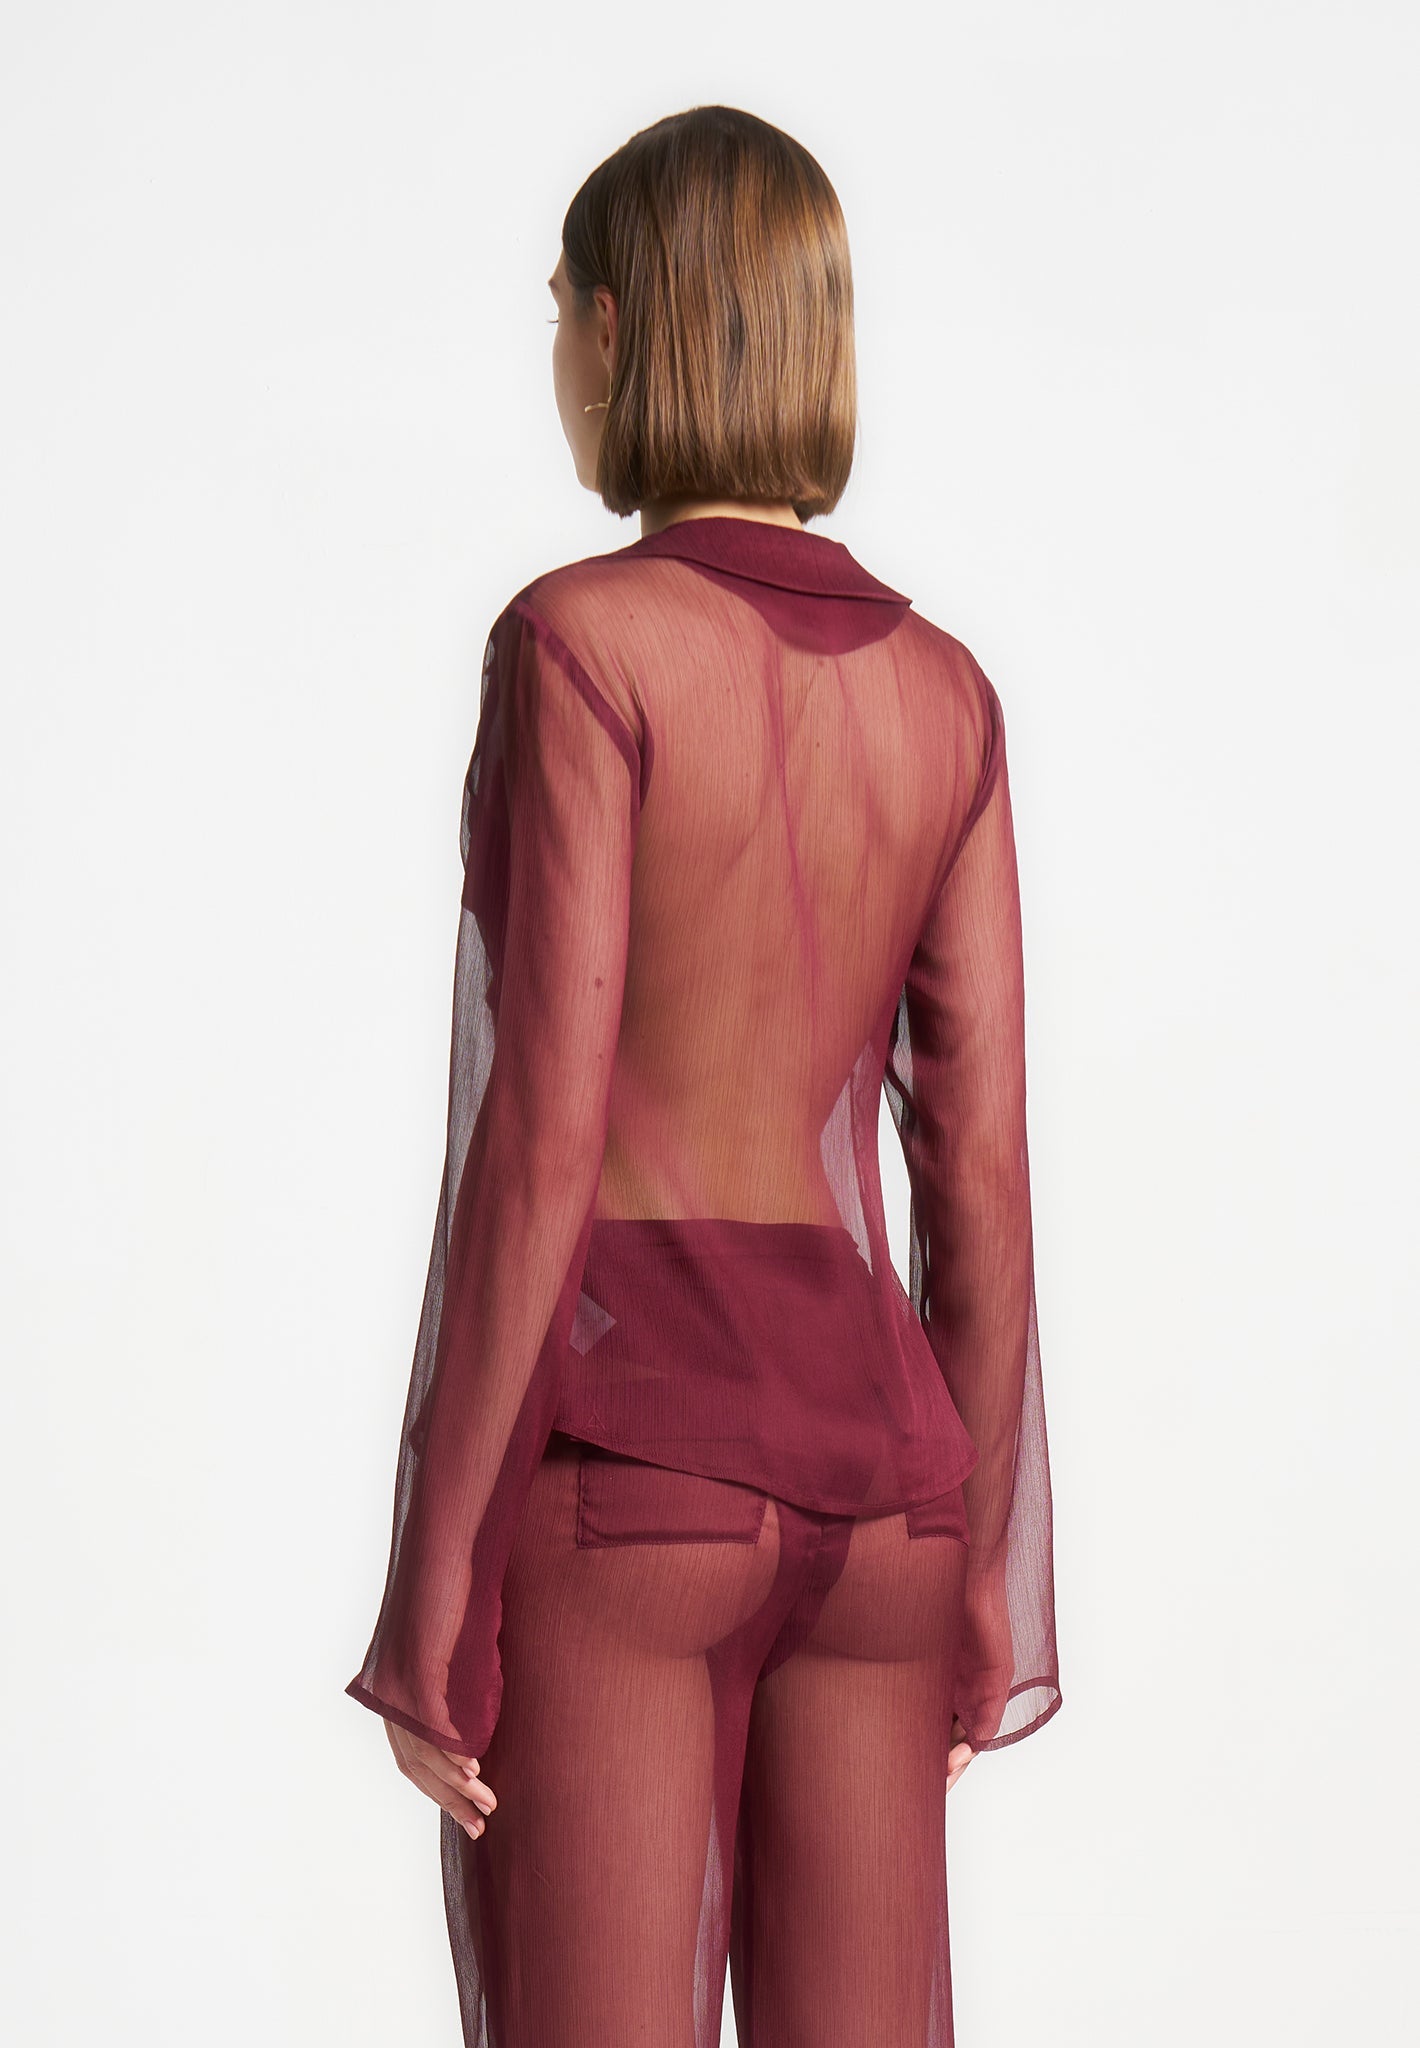 sheer-shirt-with-clasp-wine-red